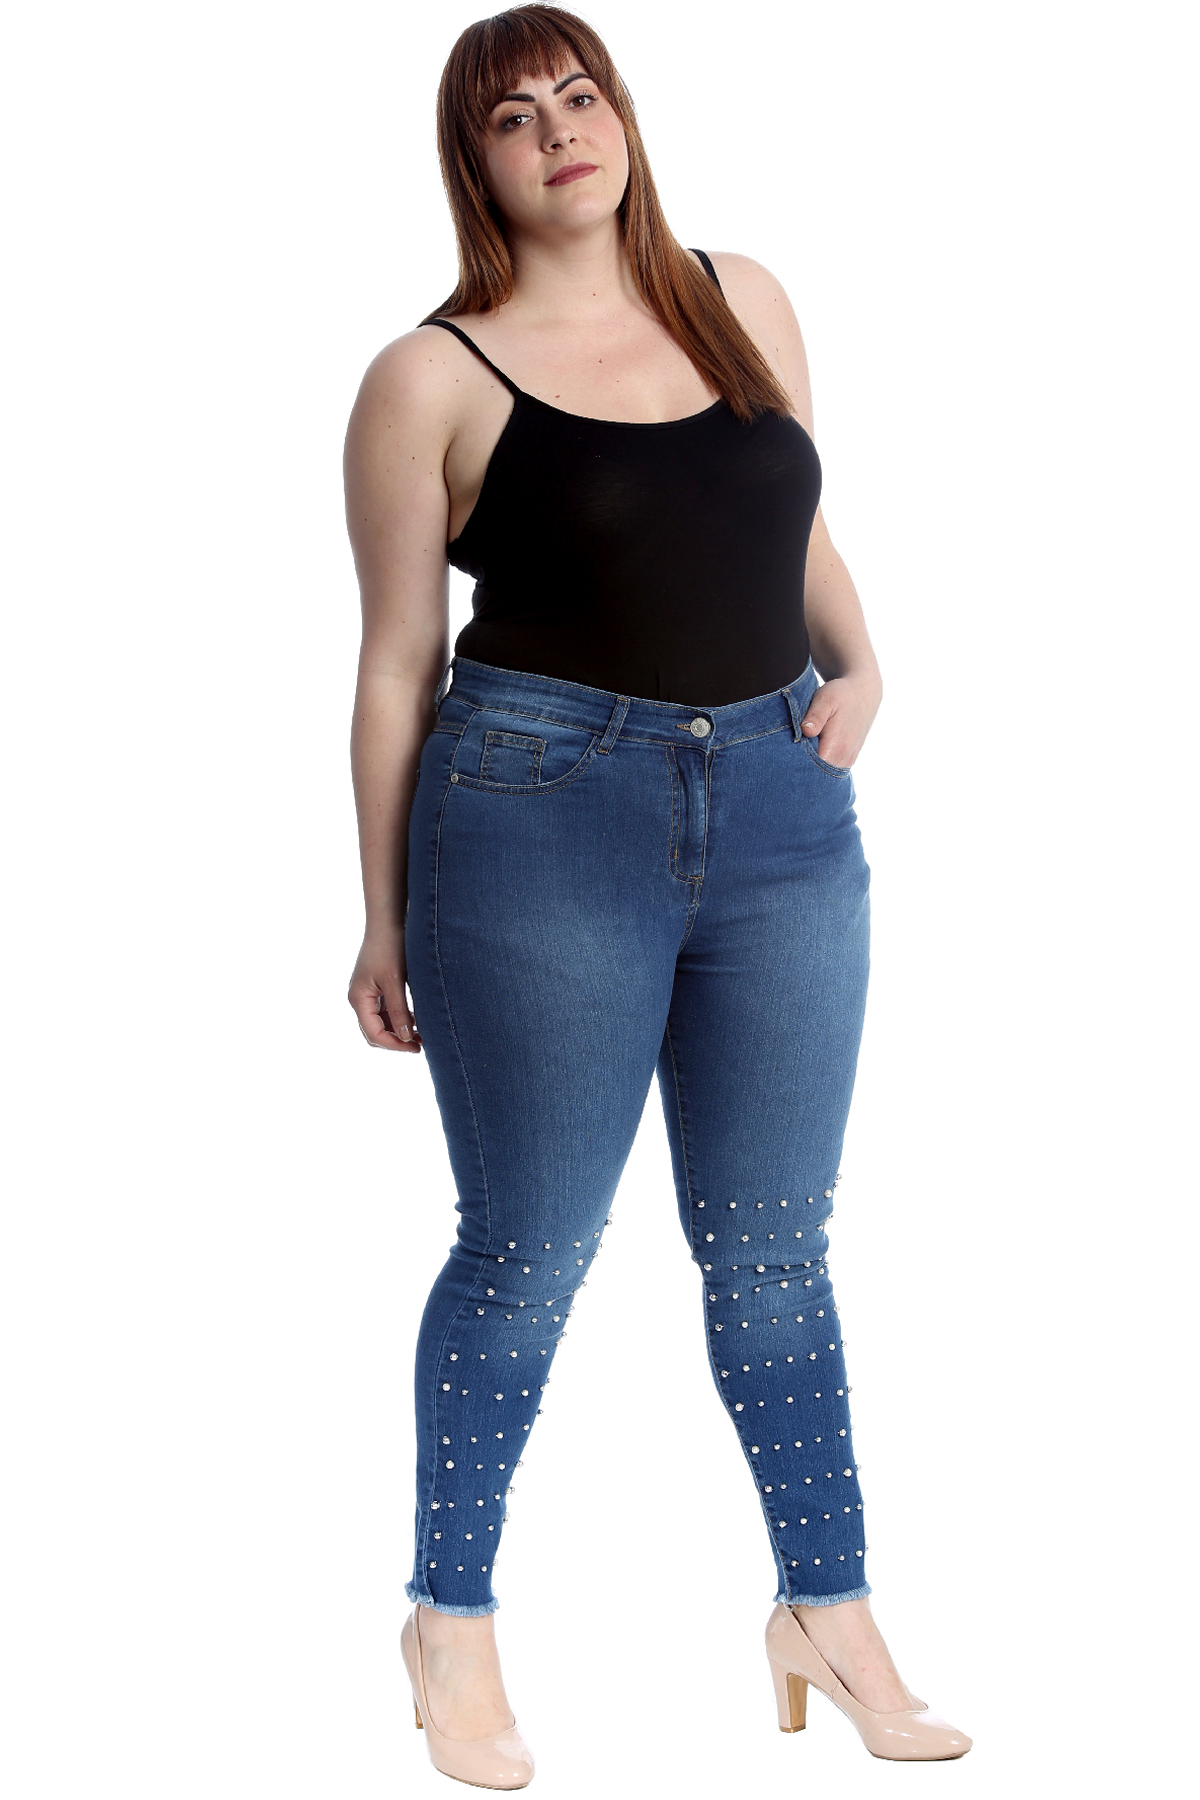 Sexy Jeans For Plus Size Women Porno Photo Hot Sex Picture